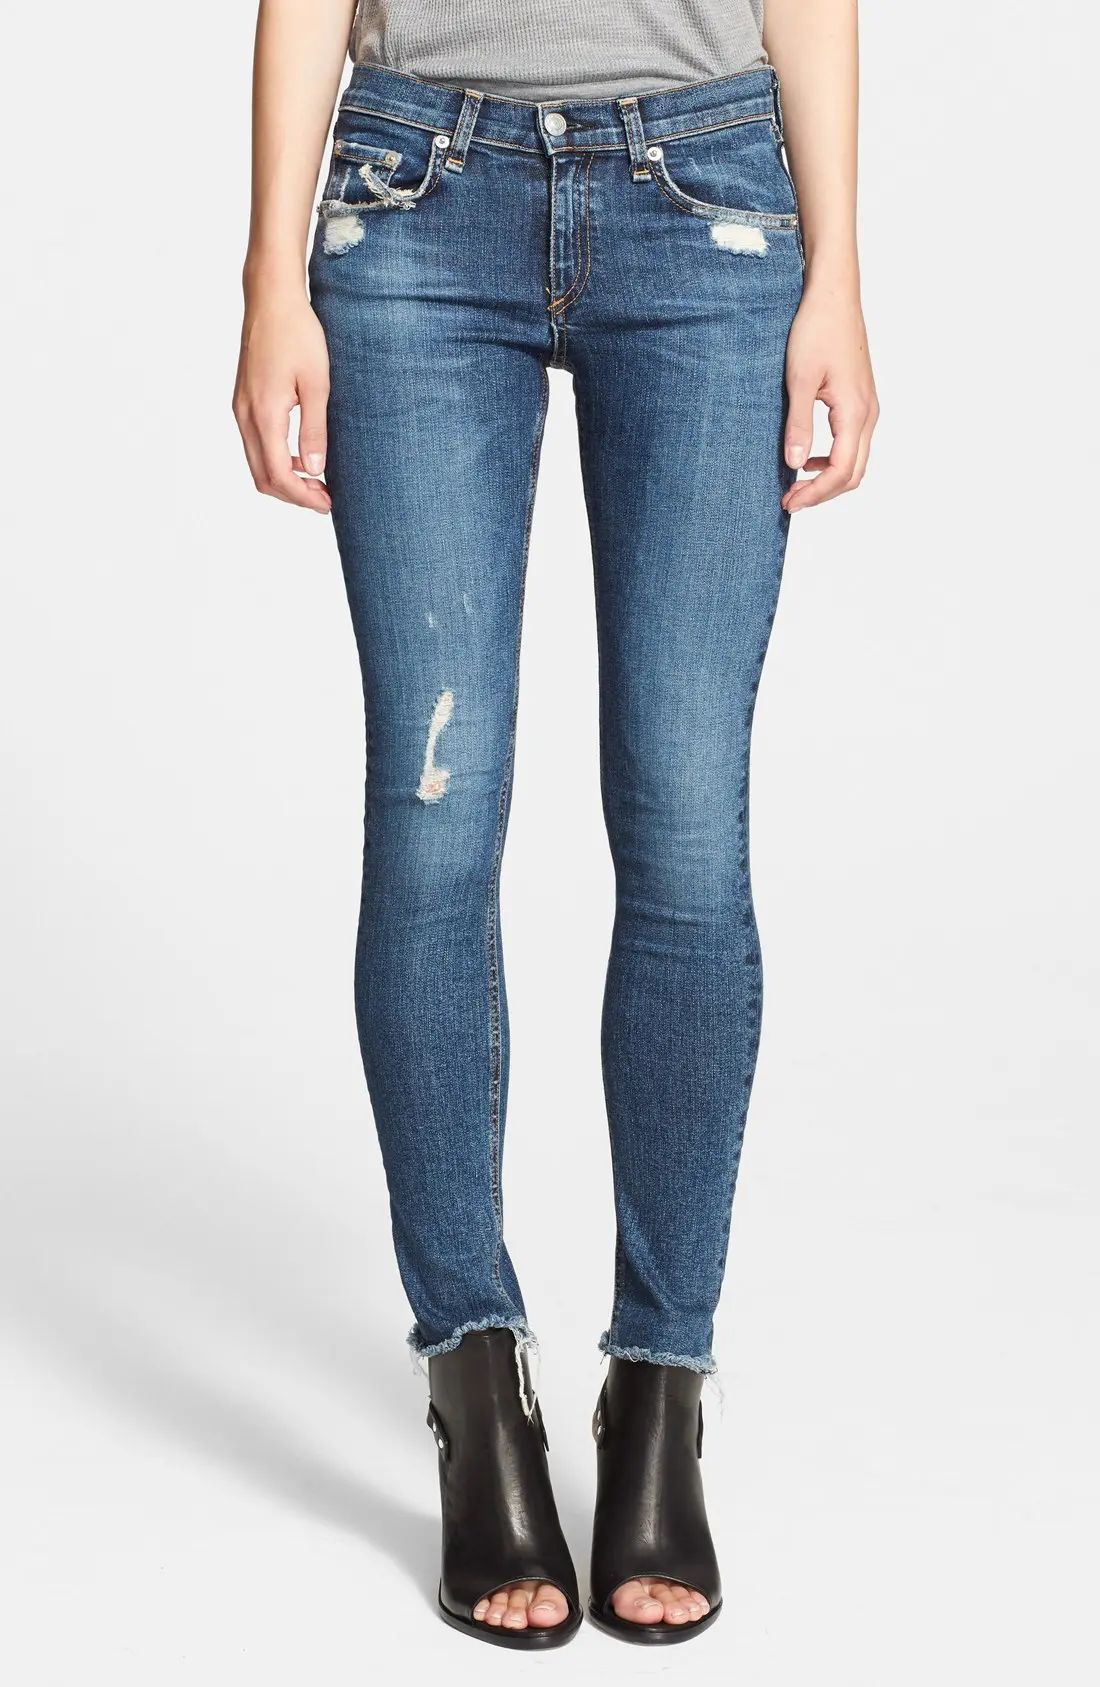 'The Skinny' Stretch Jeans | Nordstrom